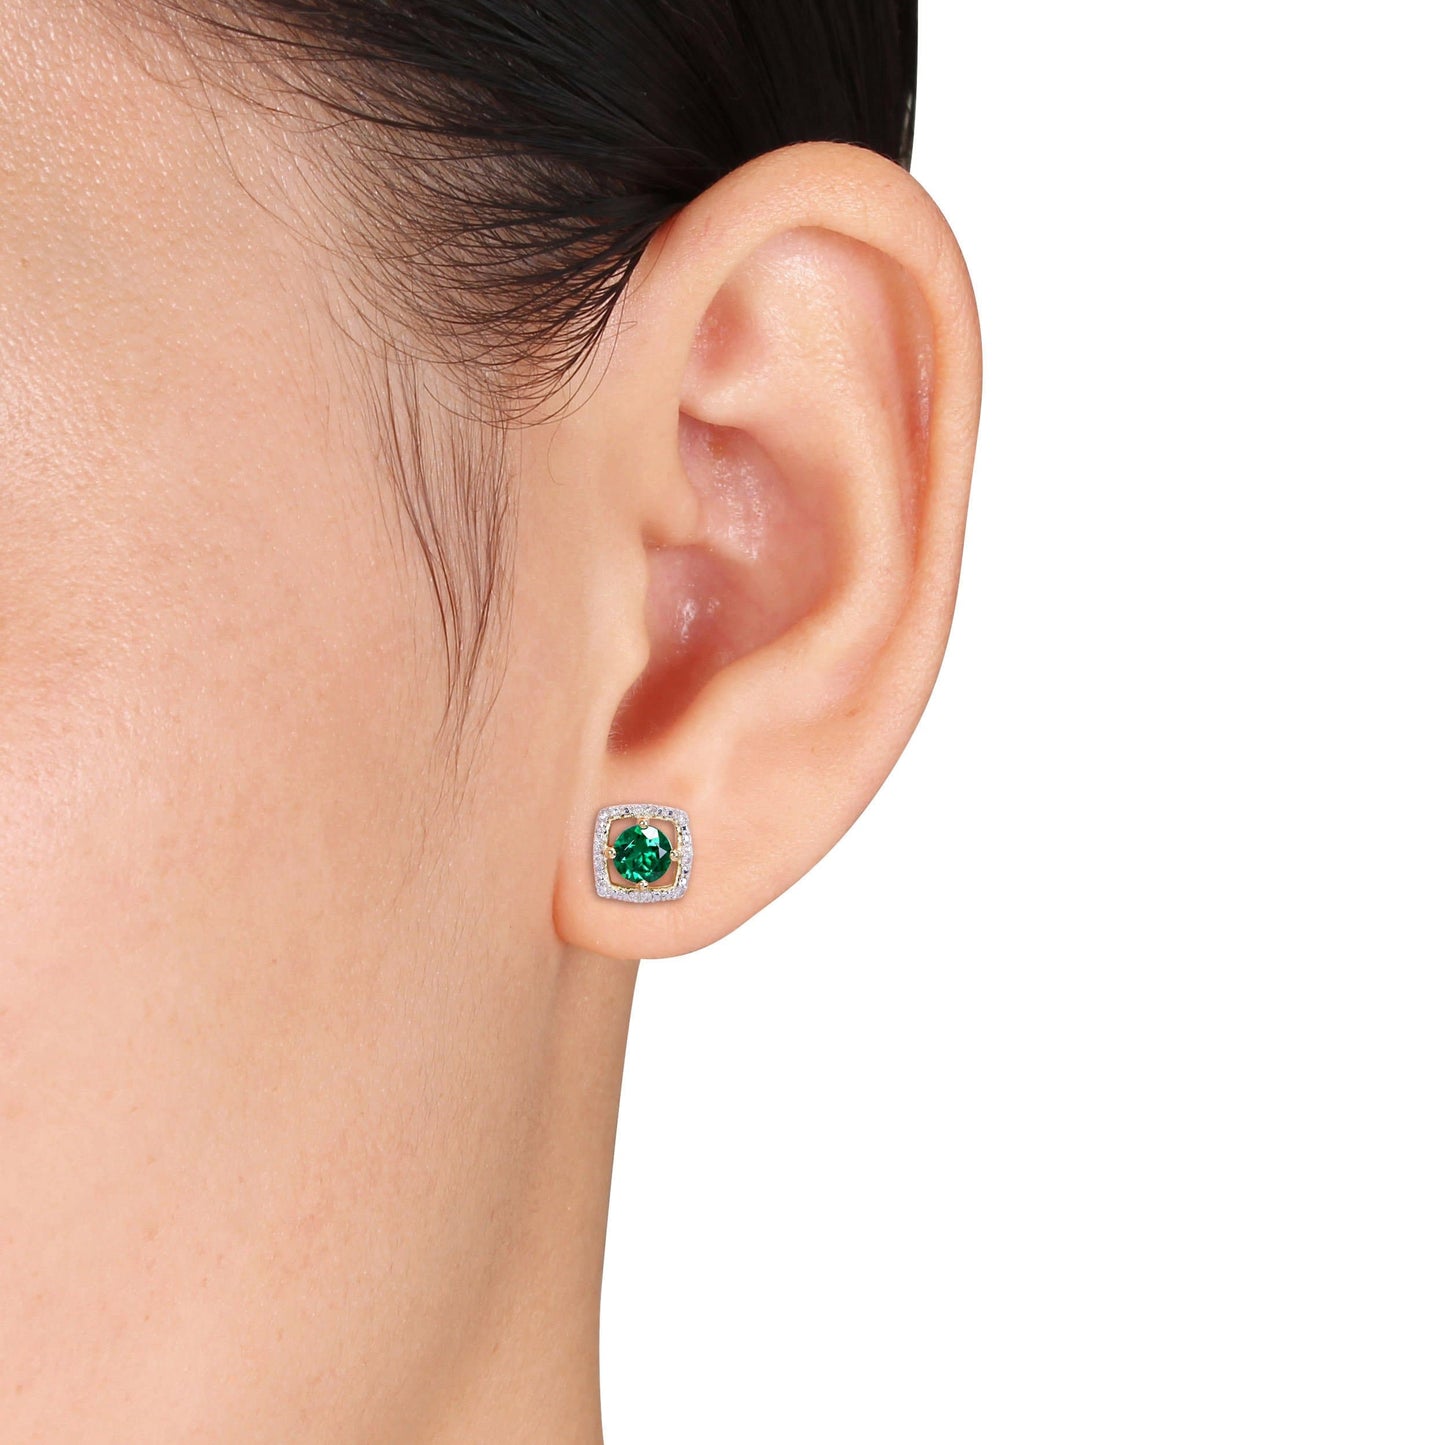 Julie Leah Emerald & Diamond Floating Studs in 10k Yellow Gold